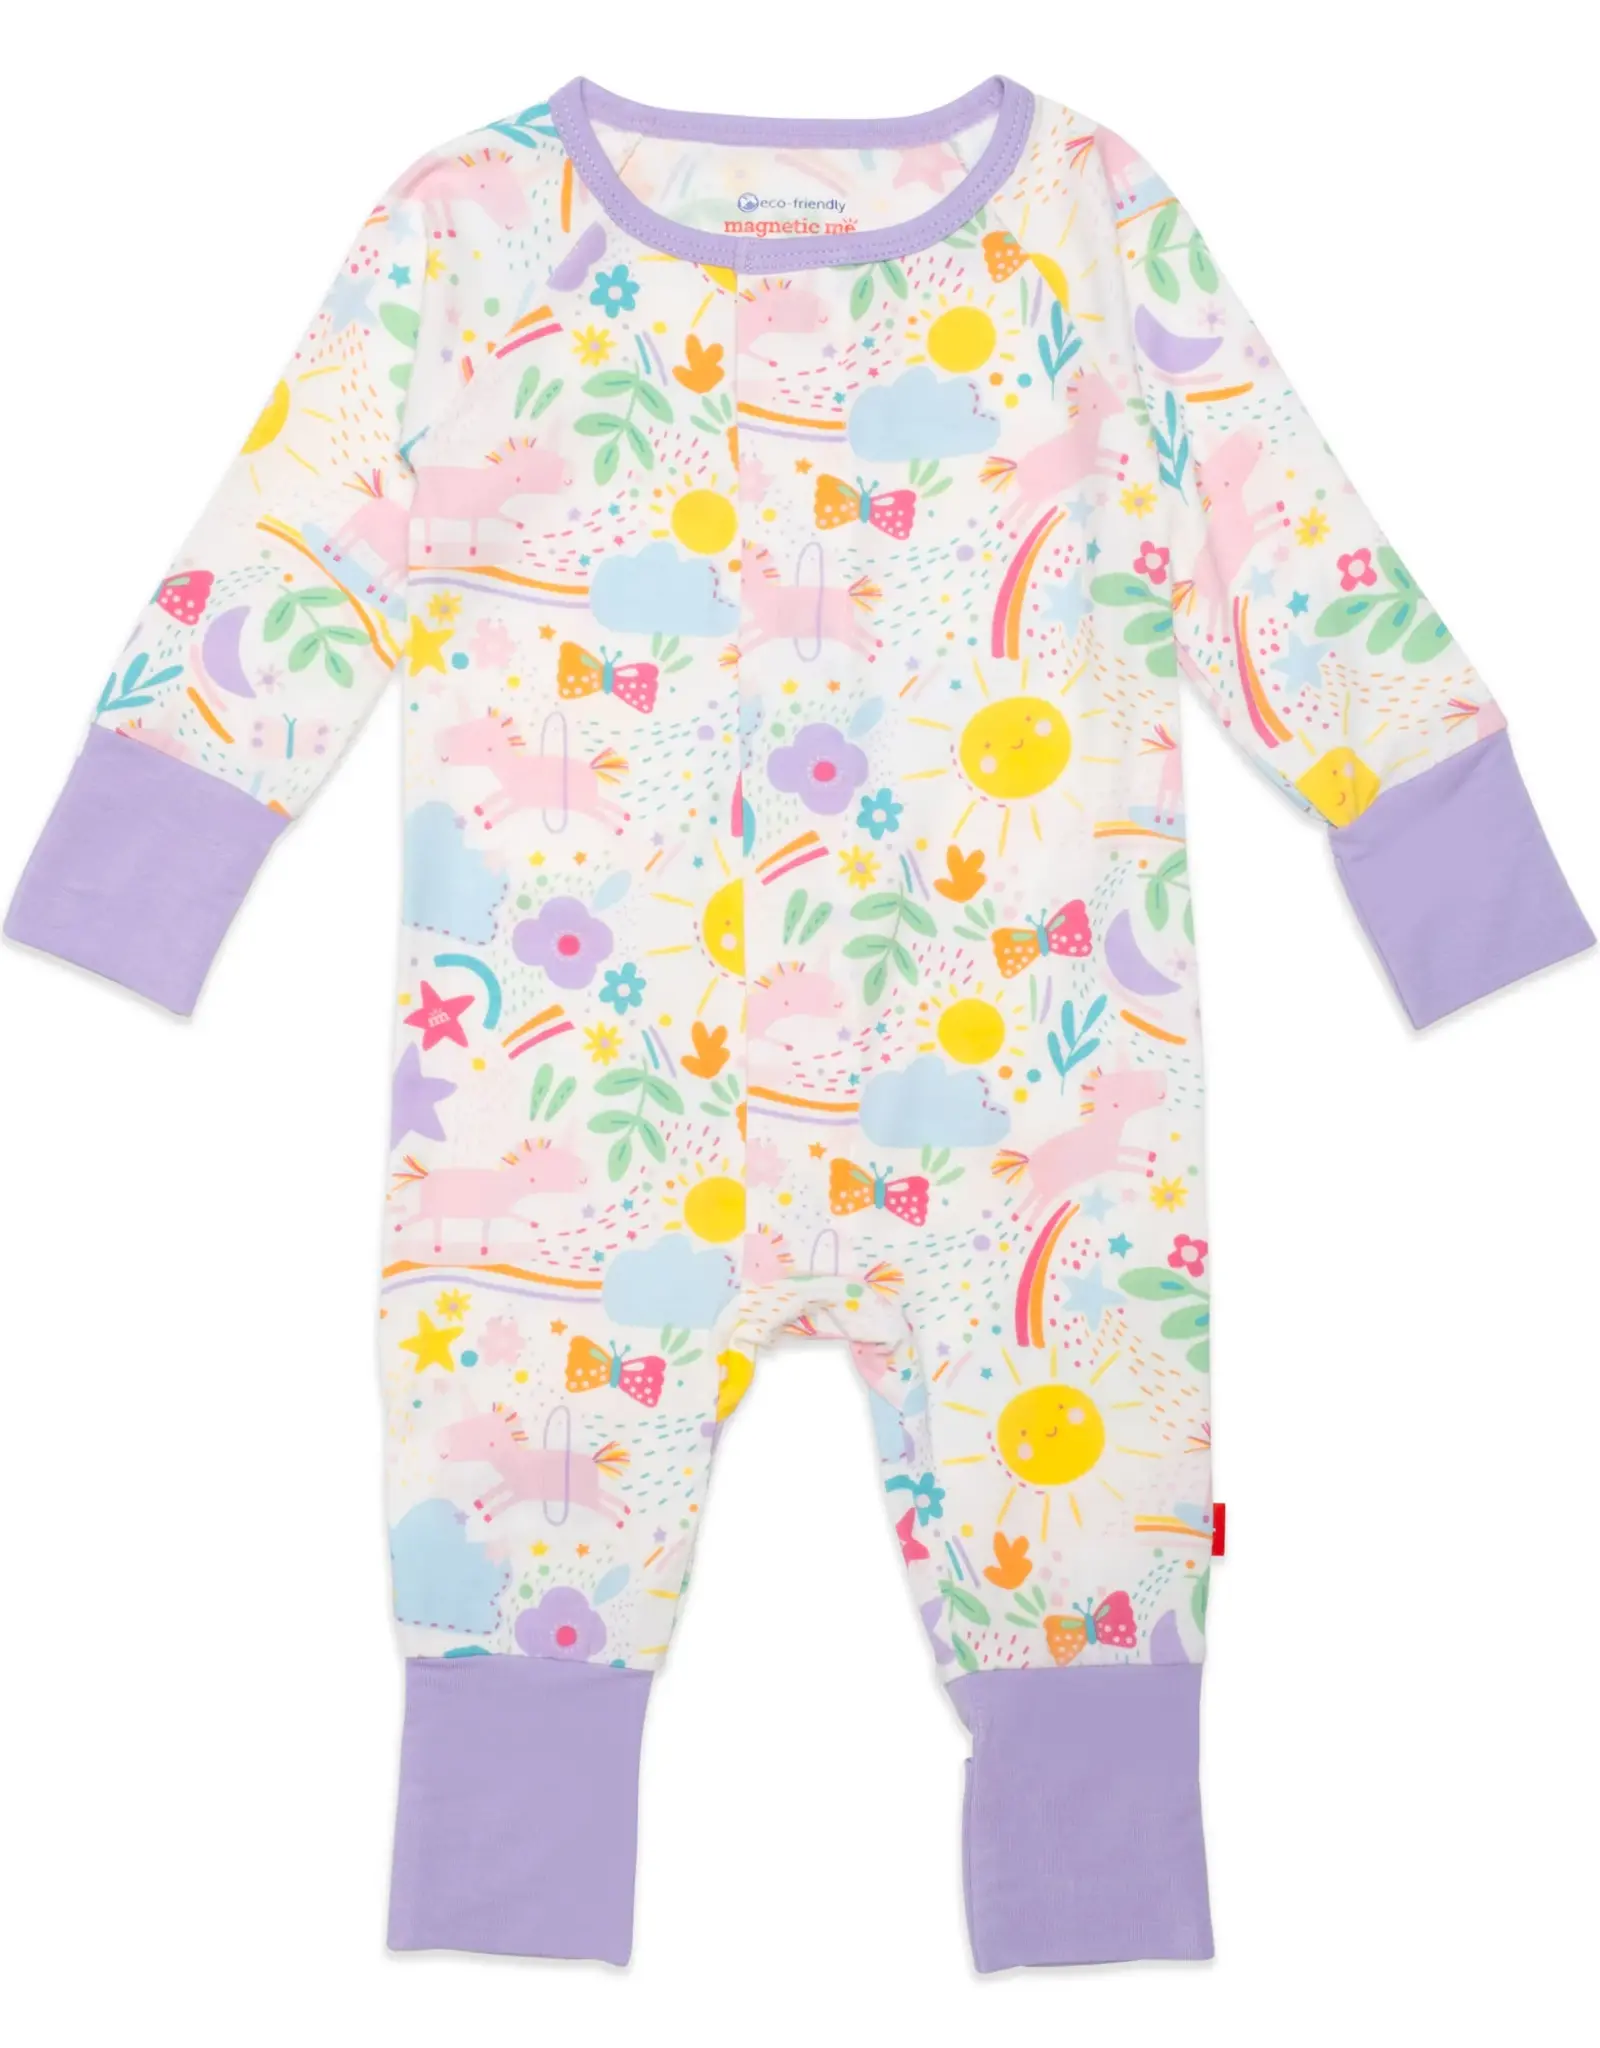 Magnetic Me 9-12MO: Coverall - Sunny Day Vibes Convertible Grow With Me